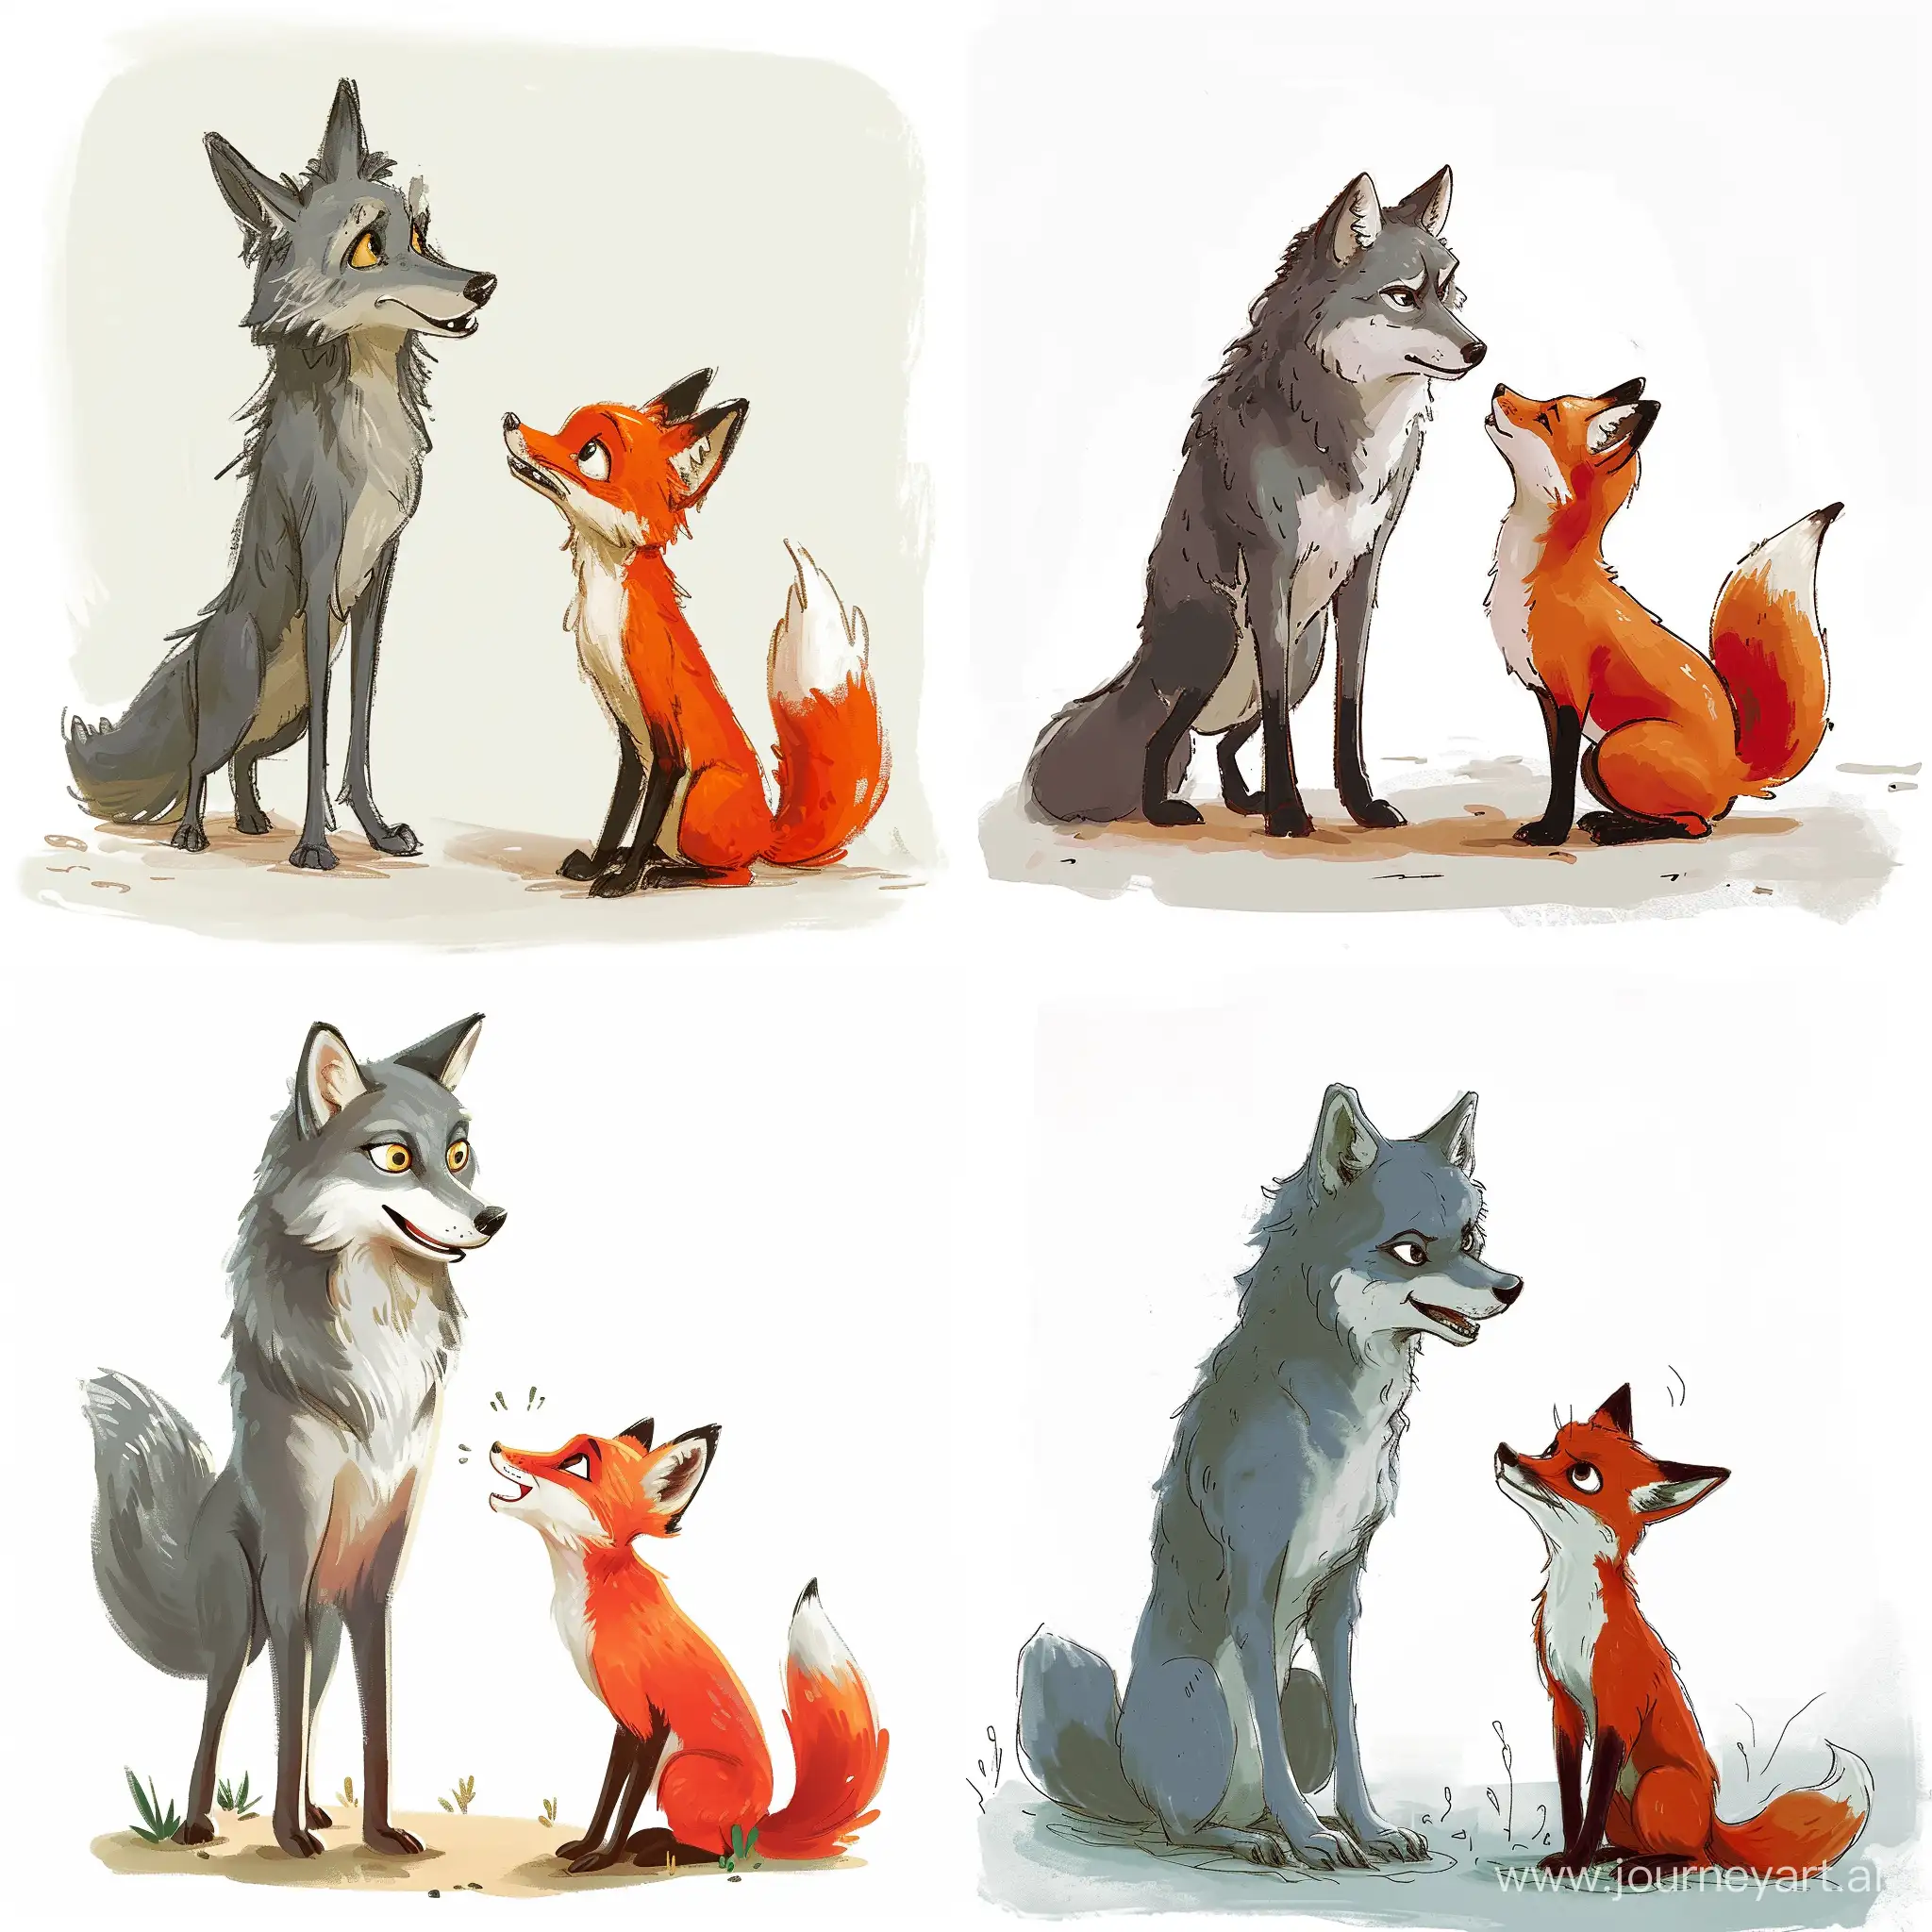 Interspecies-Conversation-Gray-Wolf-Engages-in-Whimsical-Dialogue-with-Red-Fox